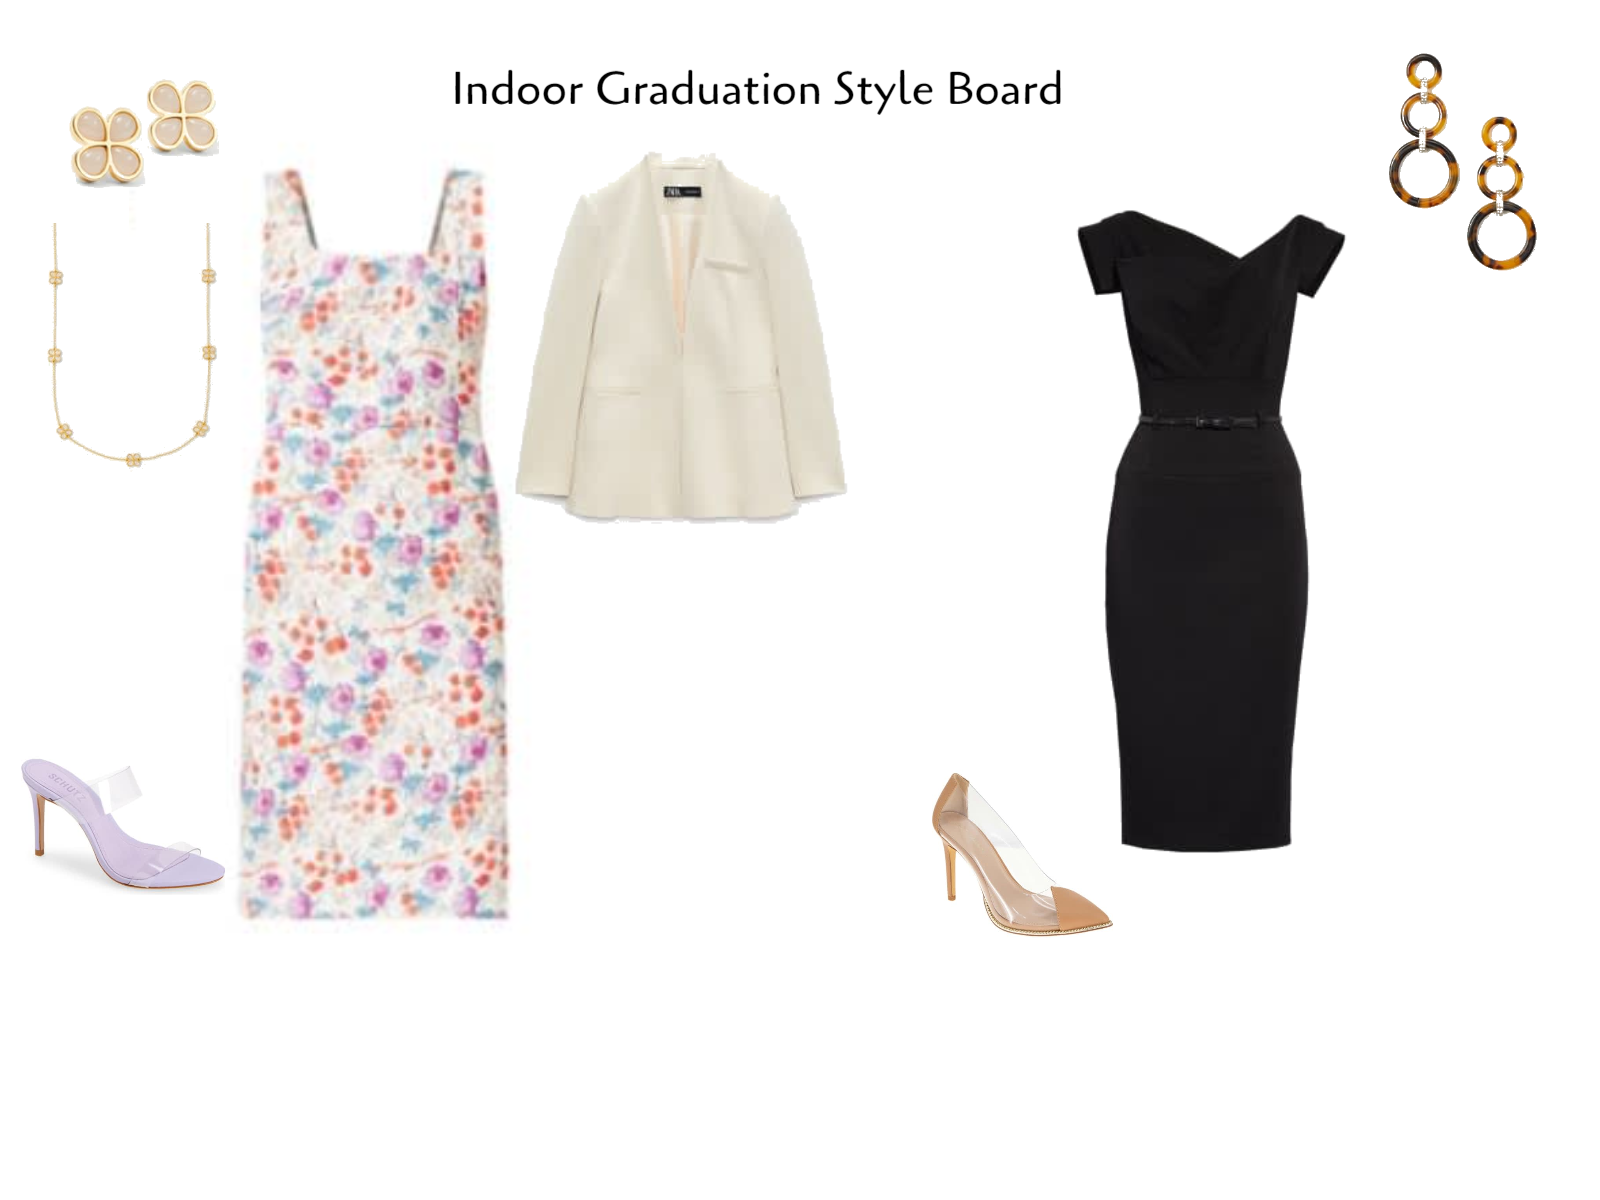 We've got you covered for graduation outfits indoors, outdoors, and ready for the graduation party!